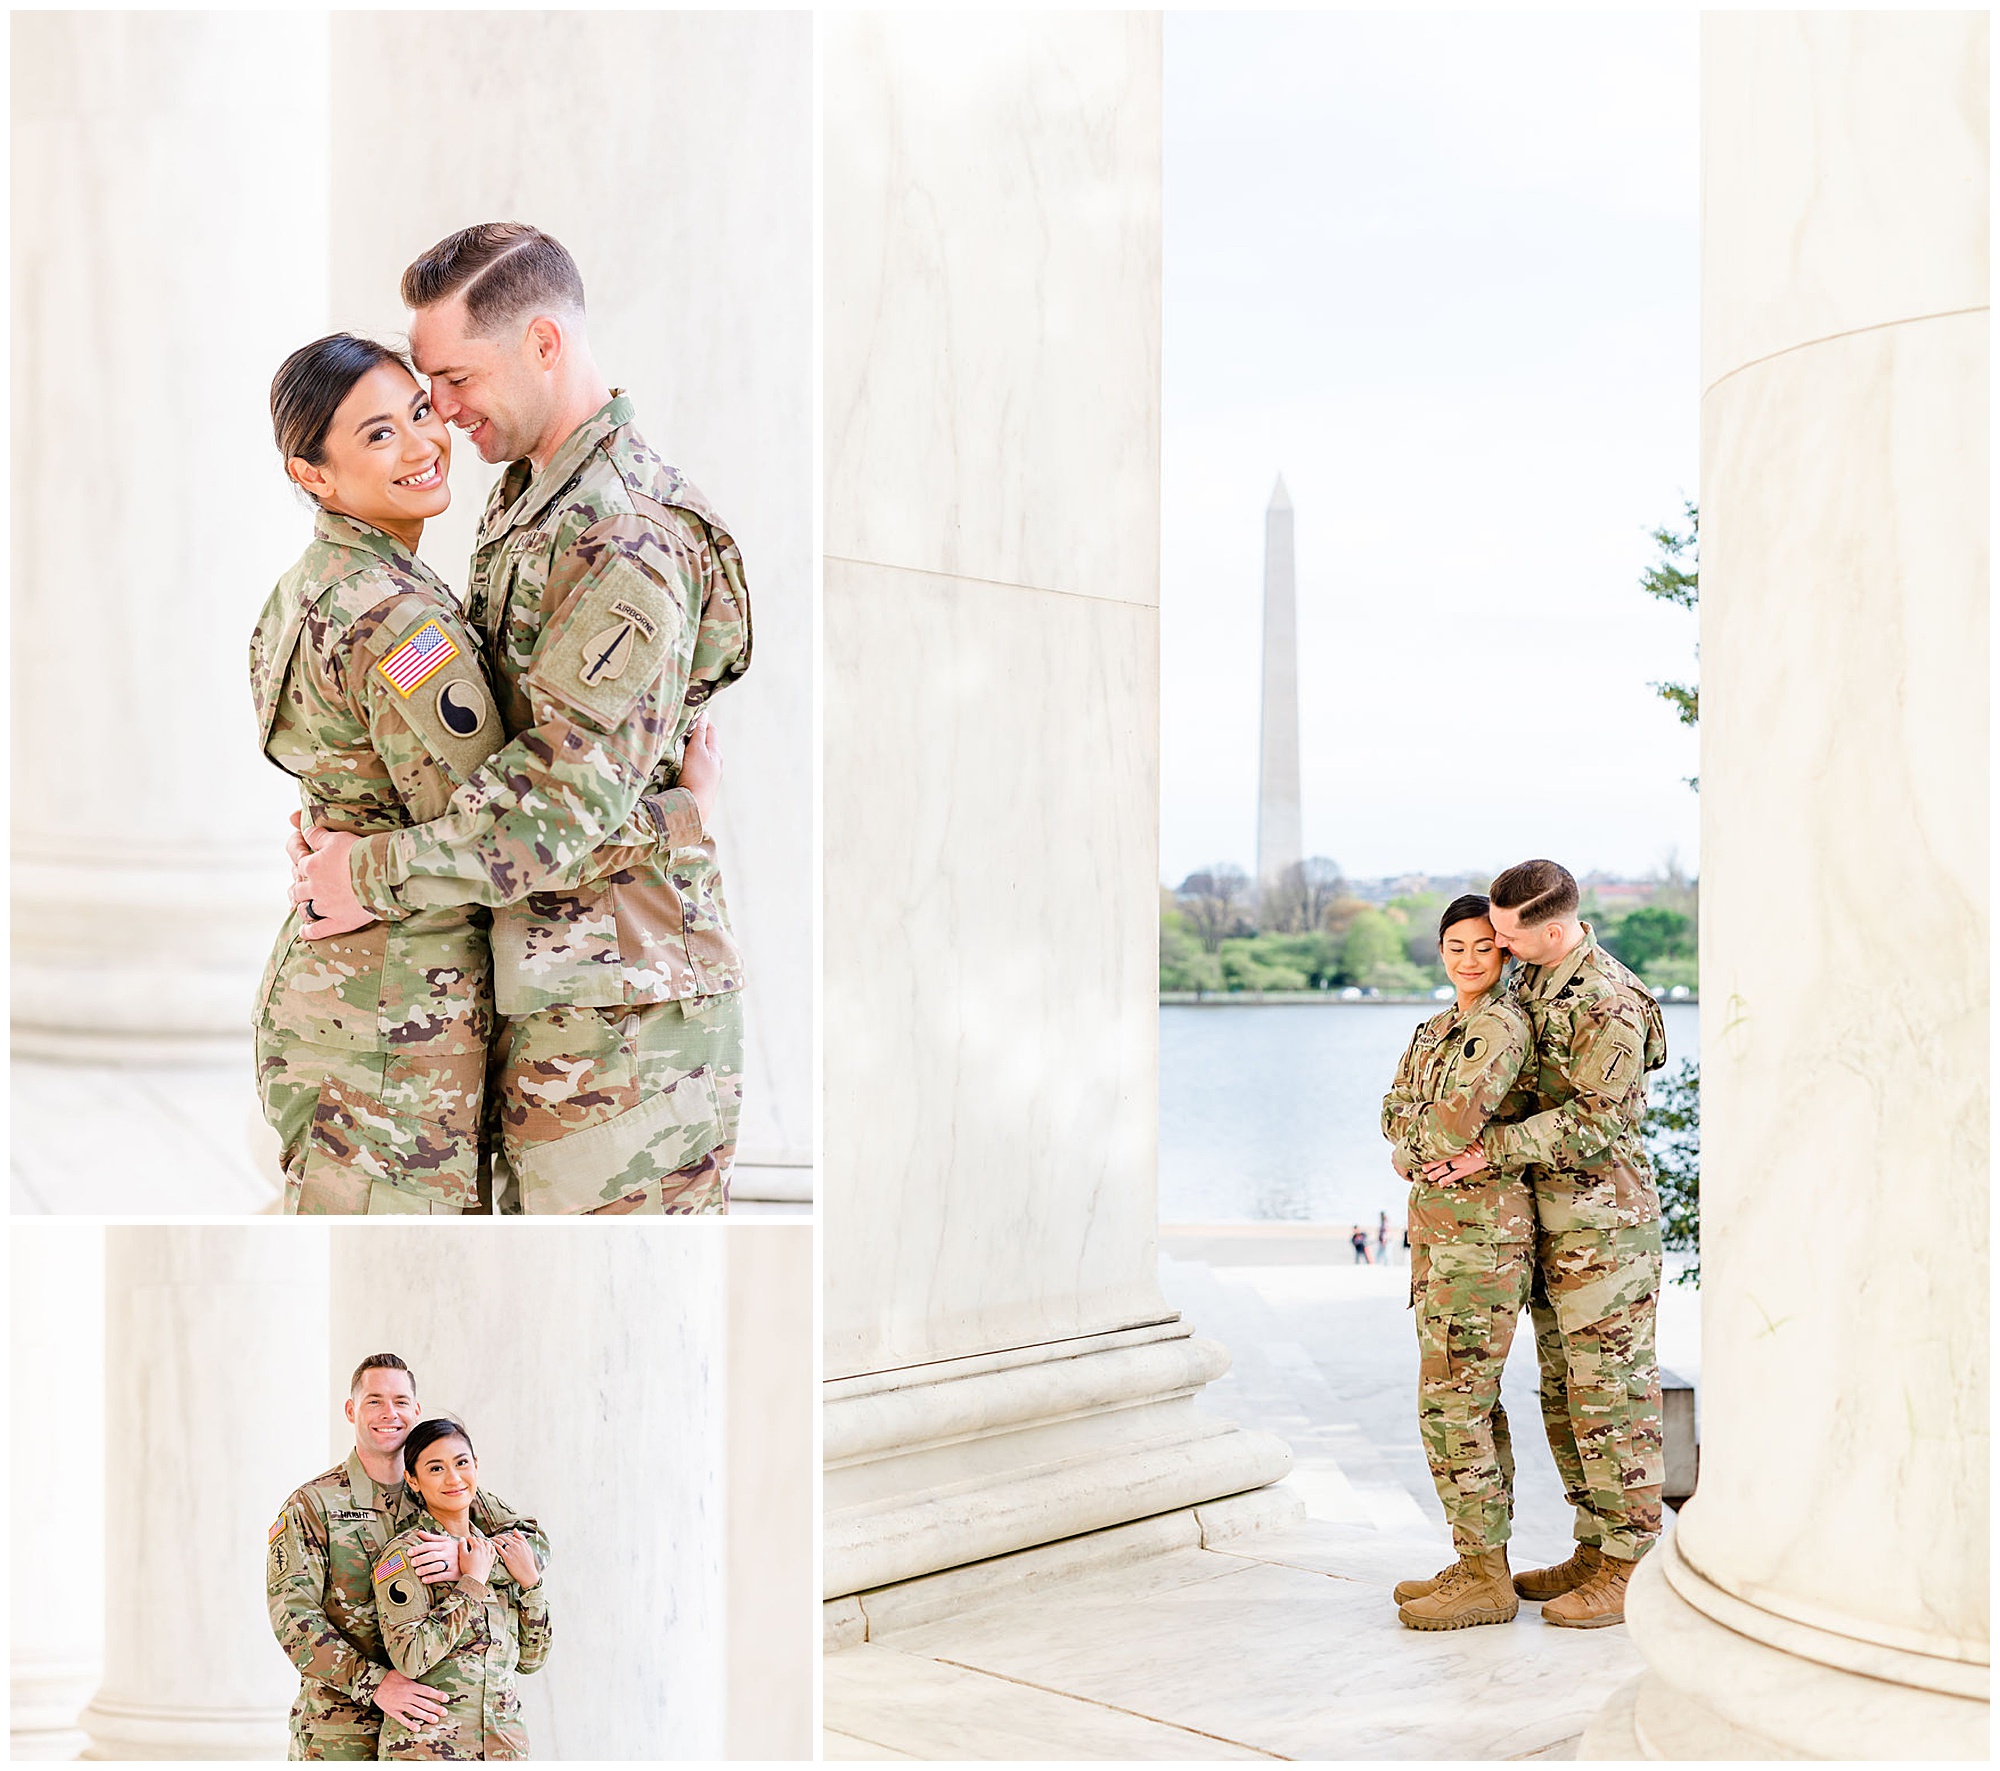 kwanzan cherry blossom portraits, Army couple, D.C. cherry blossom portraits, love birds, romantic portraits, couple goals, military couple, D.C. cherry blossoms photos, spring portraits, newlywed portraits, Rachel E.H. Photography, woman looking at camera, woman in army uniform, man hugging woman from behind